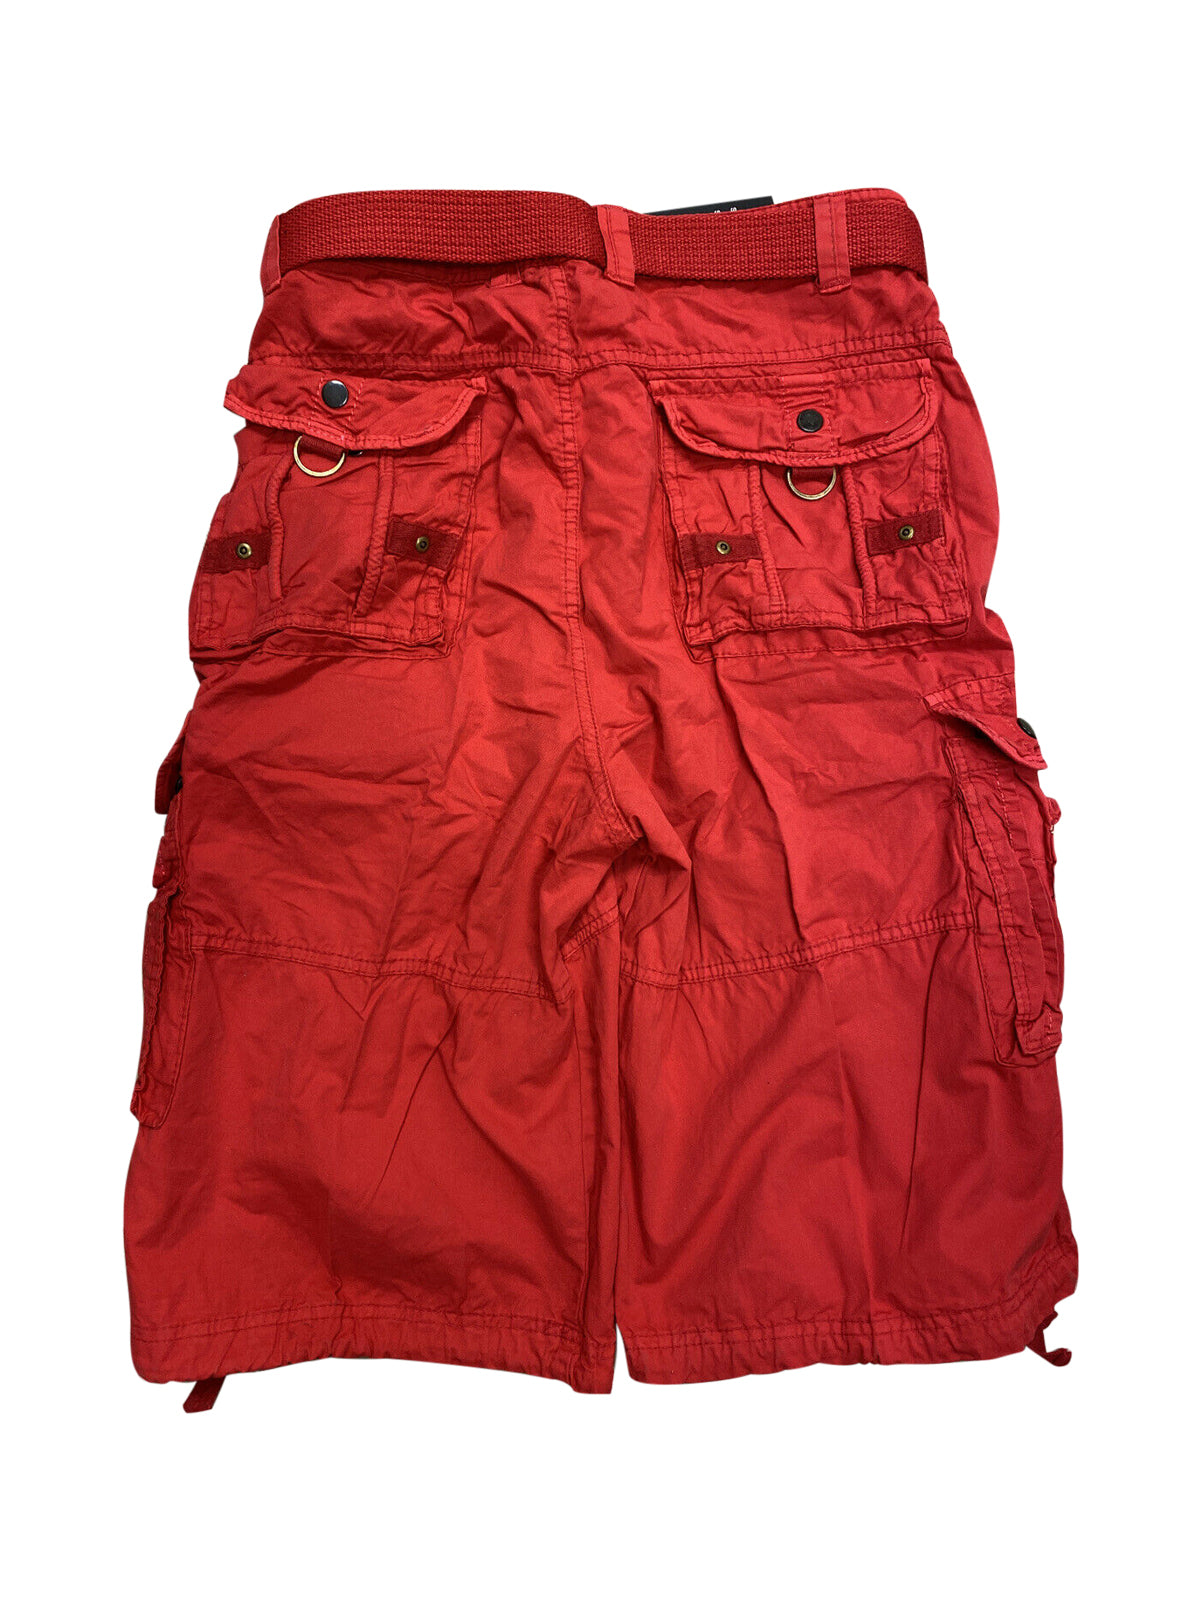 Mens Red Cargo Shorts with Adjustable Belt